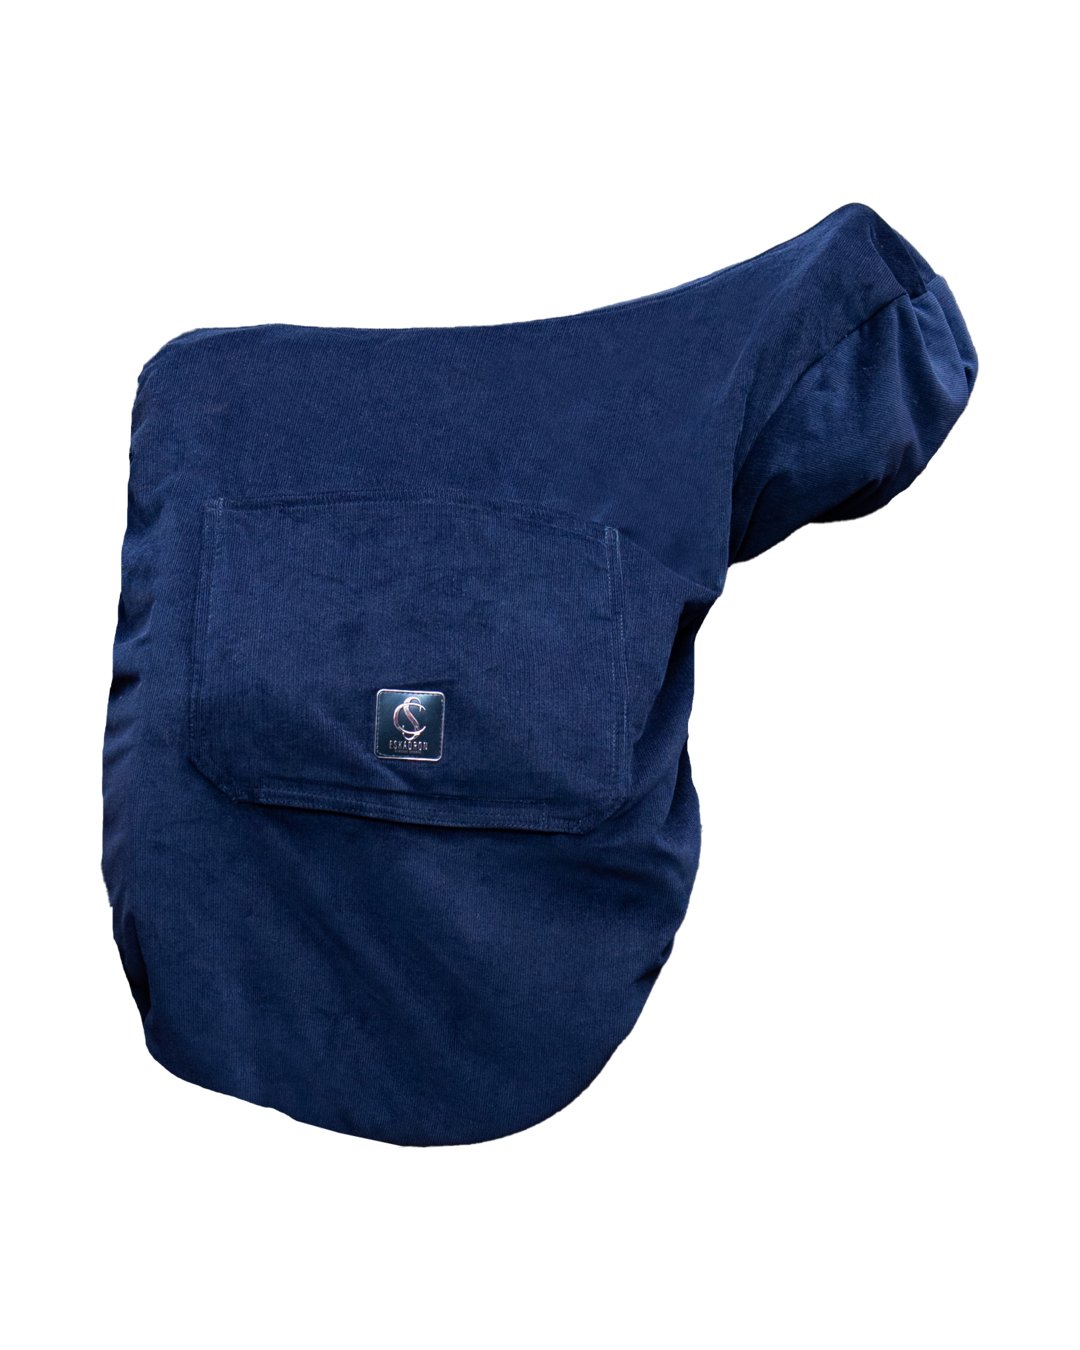 Sattelschoner Cord Classic Sports One Size Navy